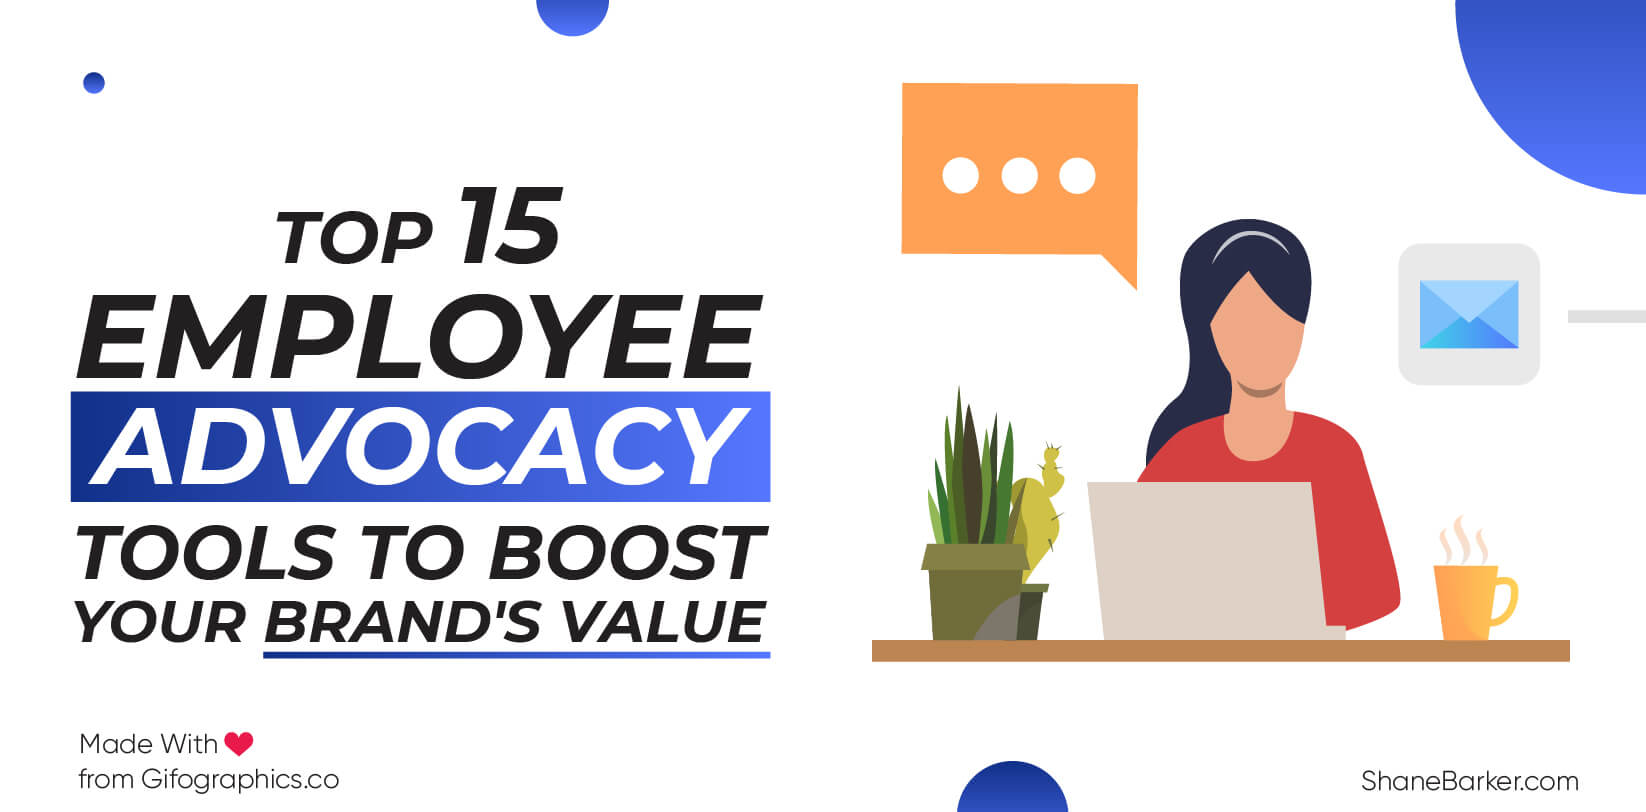 Top 15 Employee Advocacy Tools to Boost Your Brand's Value